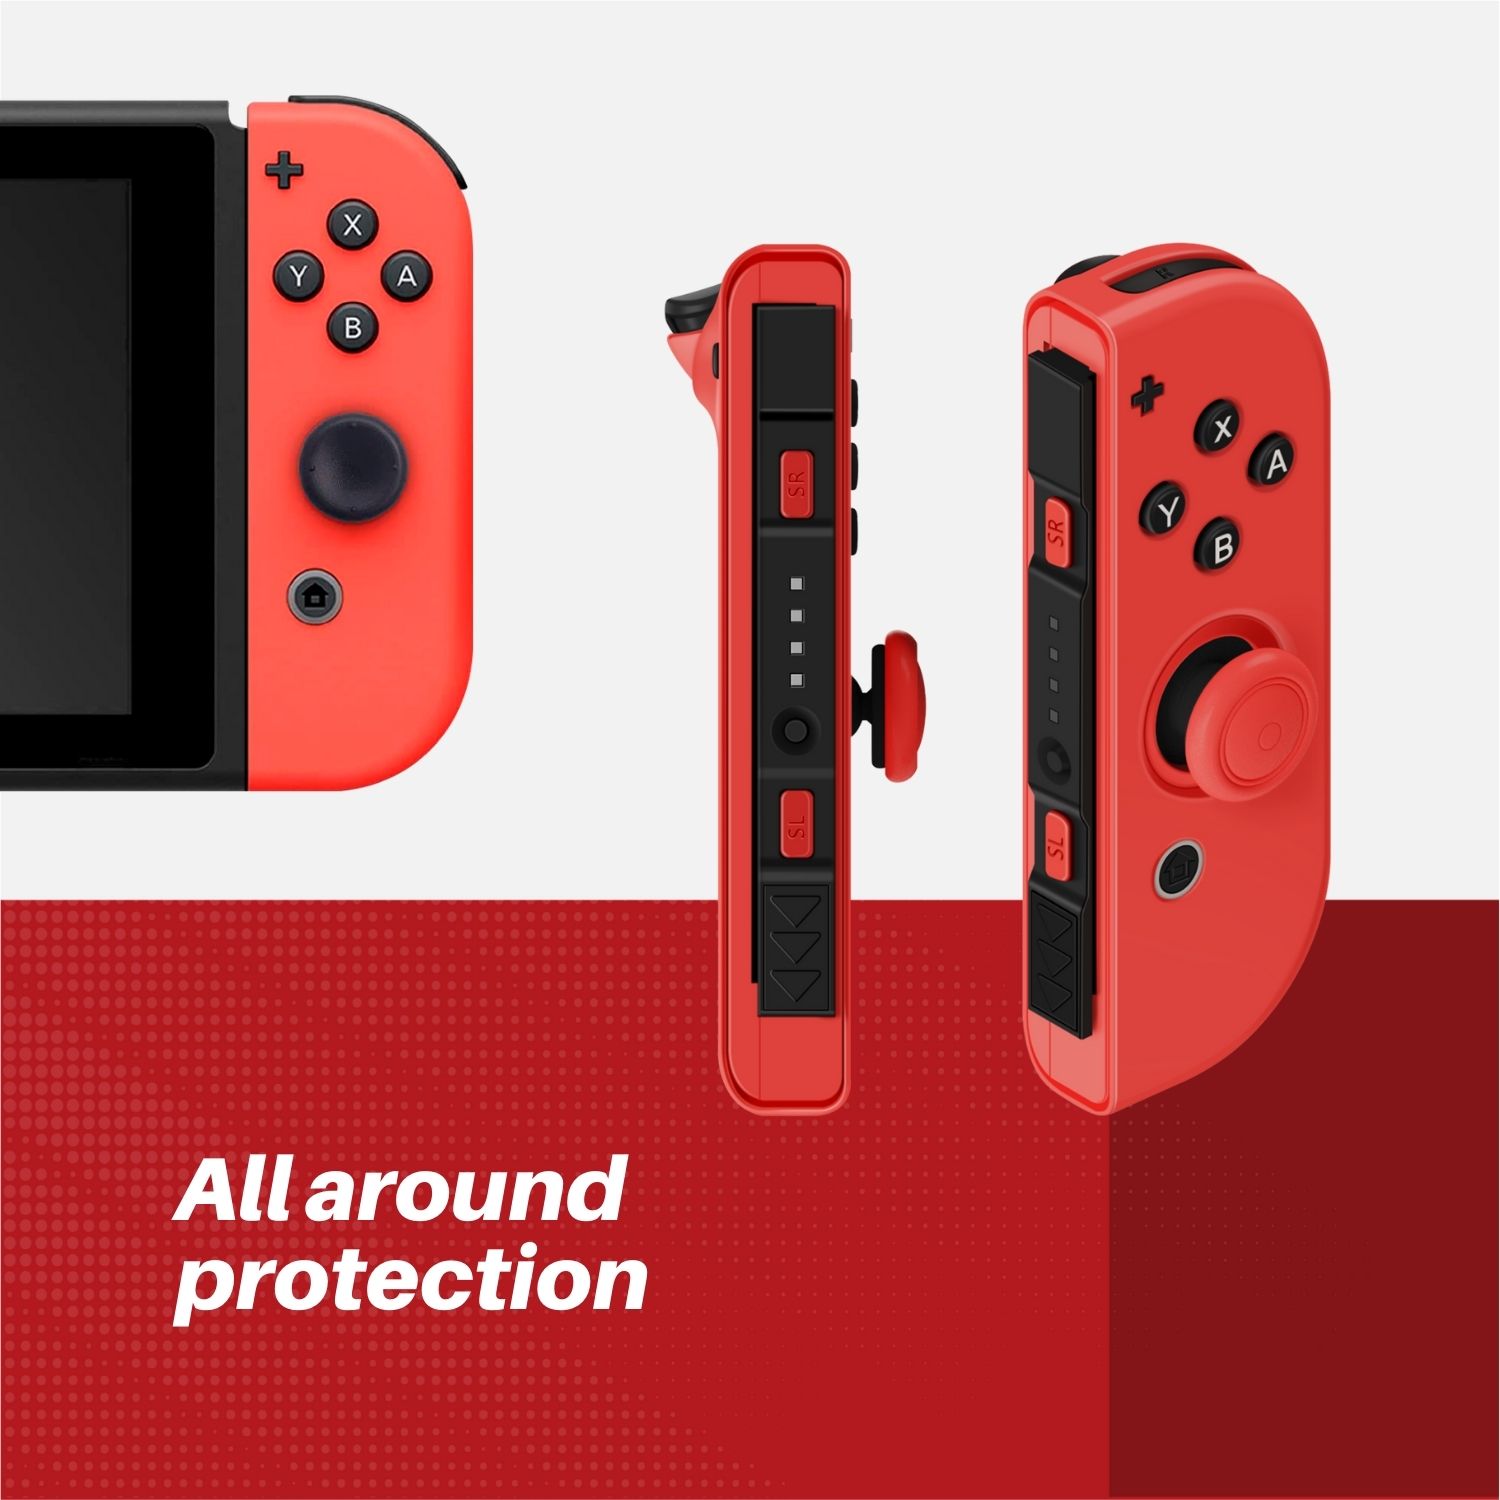 Joy-Con Grip Gel Guards provides a protective layer works for Nintendo Switch Joy-Cons to guard against scratches and other low impact surface damage